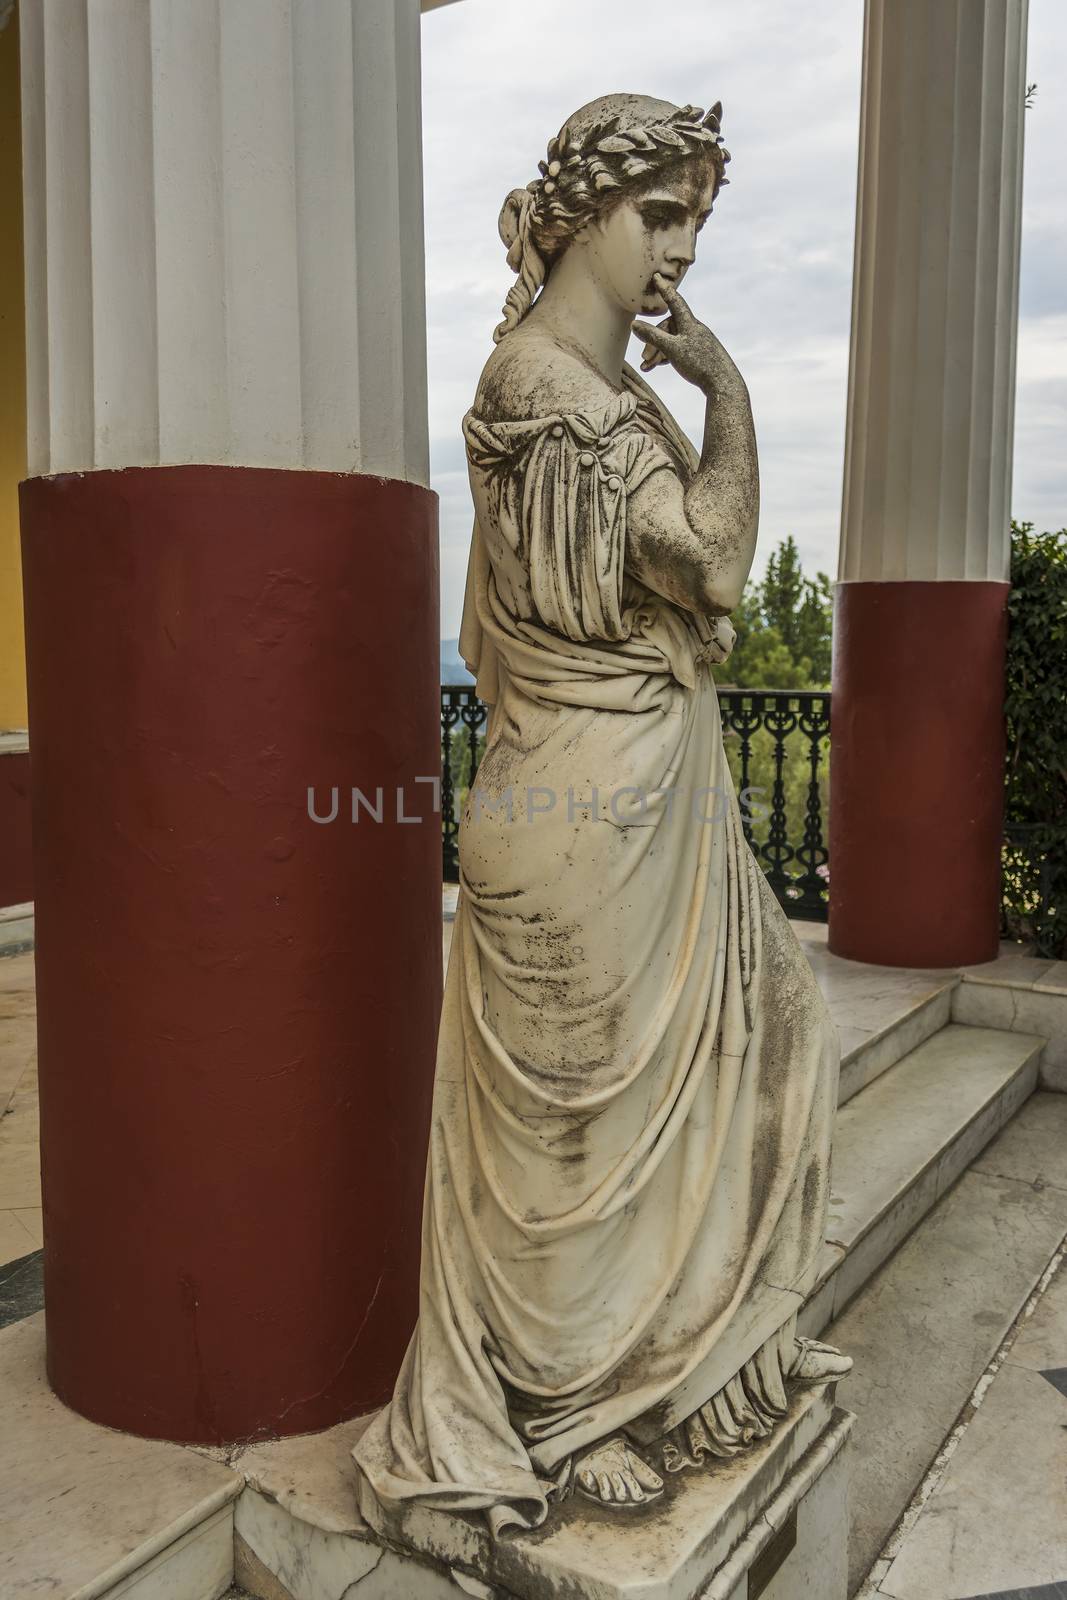 Achilleion palace, Corfu, Greece - August 24, 2018: Statue of a Greek mythical muse in the Achilleion palace in Corfu, Greece